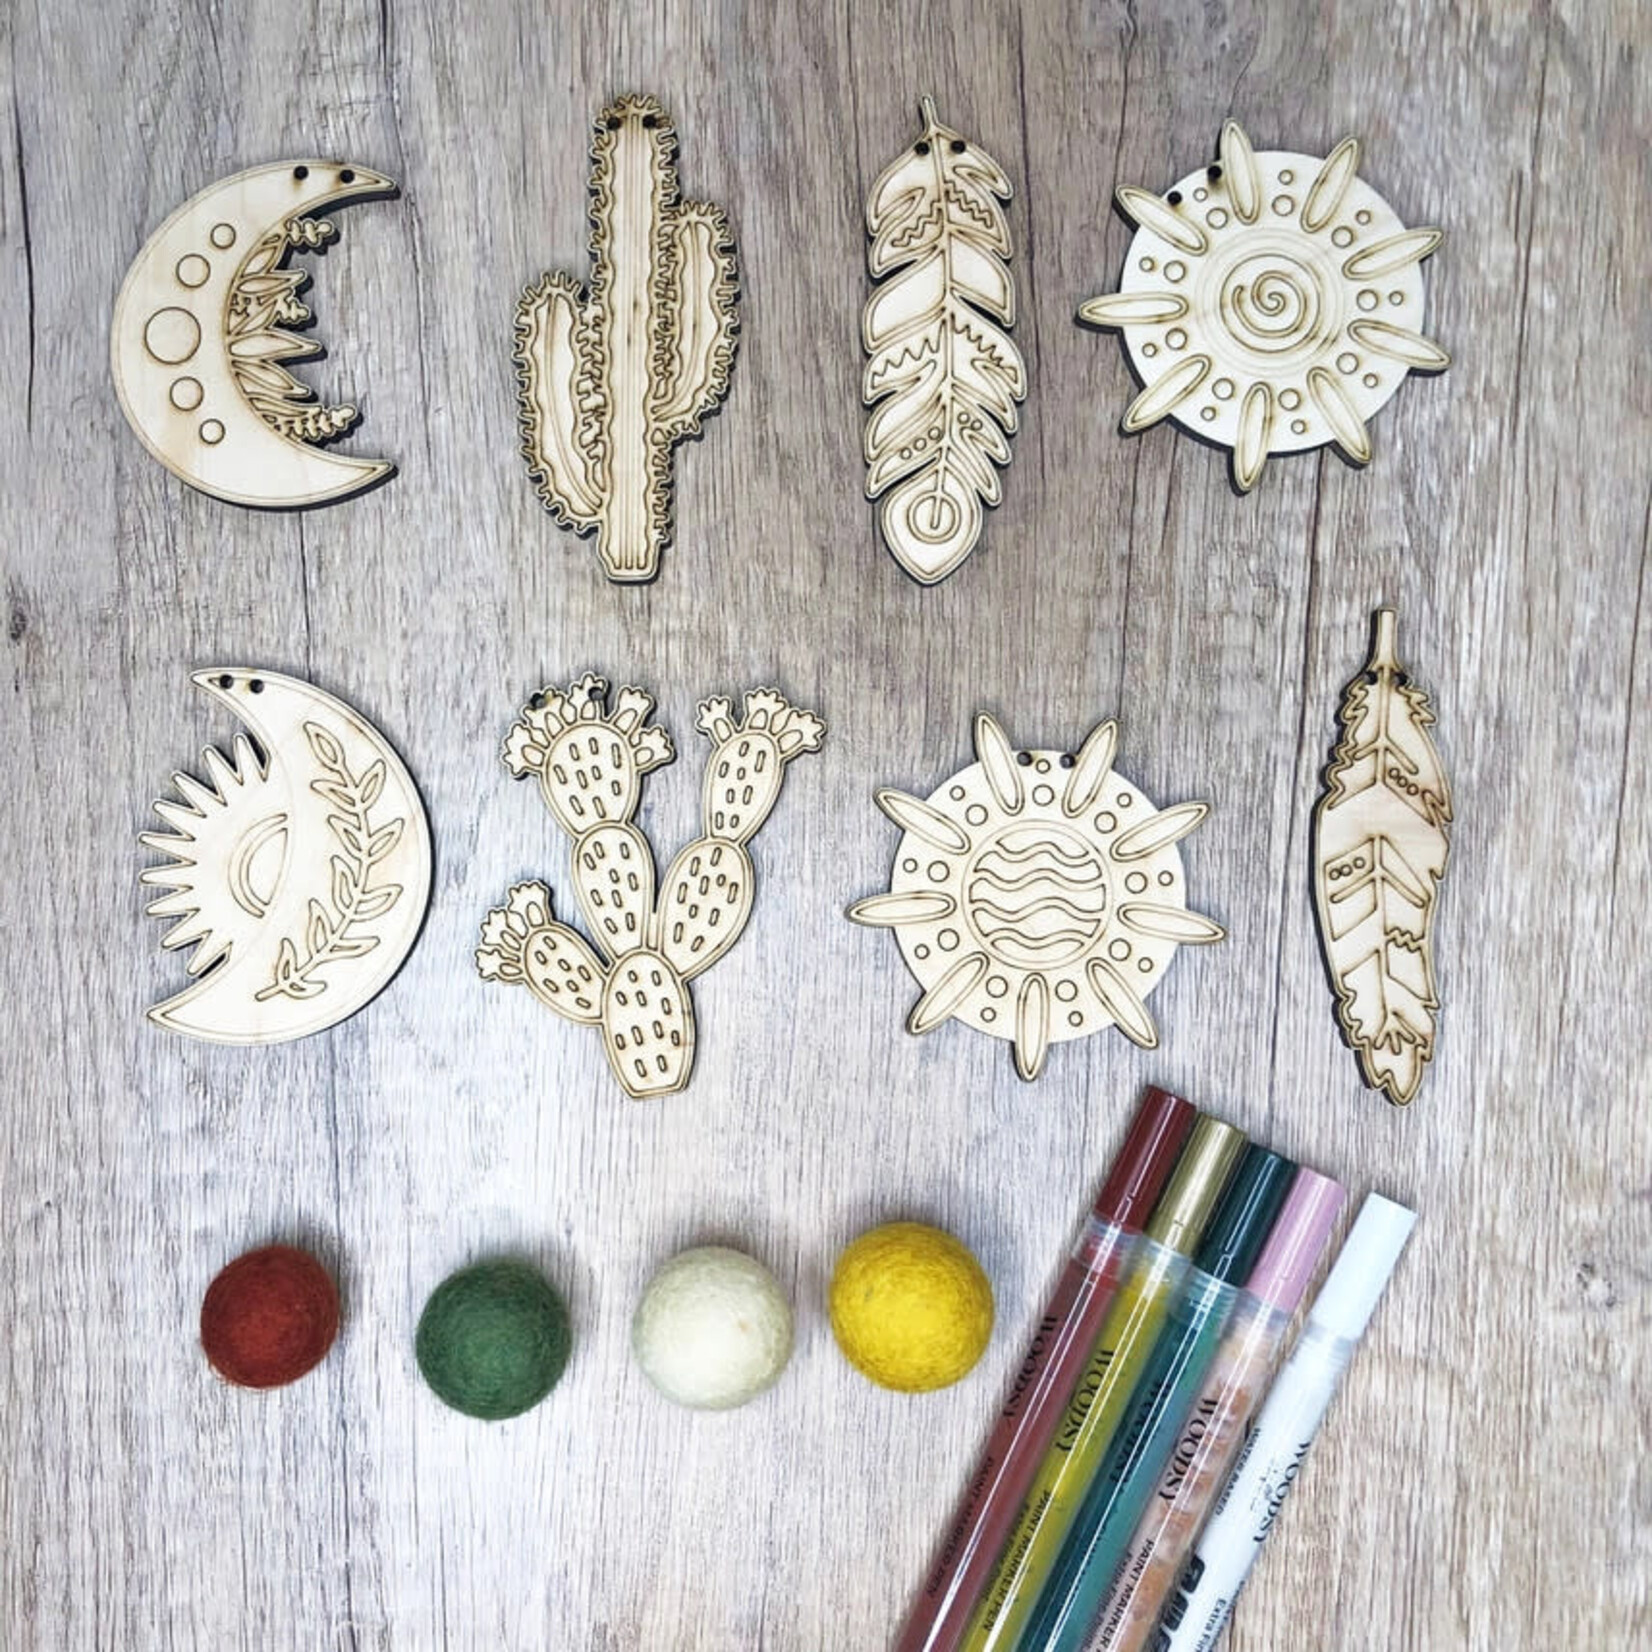 The Woodsy Craft Co The Boho Garland Kit